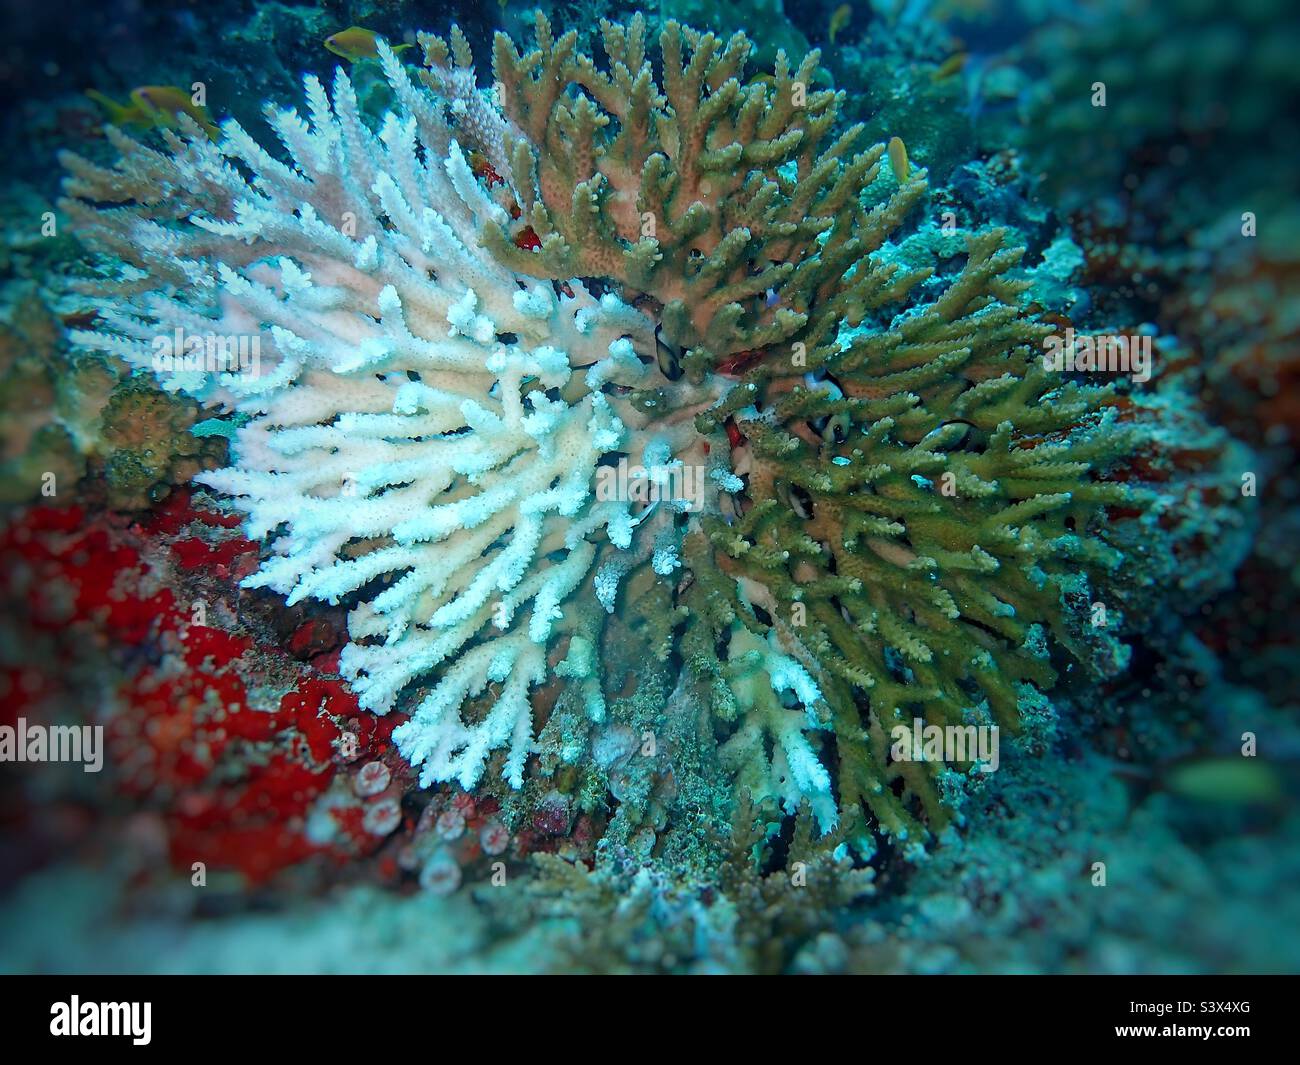 A perfect example of coral bleaching on a branching coral, Acropora sp. , in Maldives, Indian Ocean Stock Photo